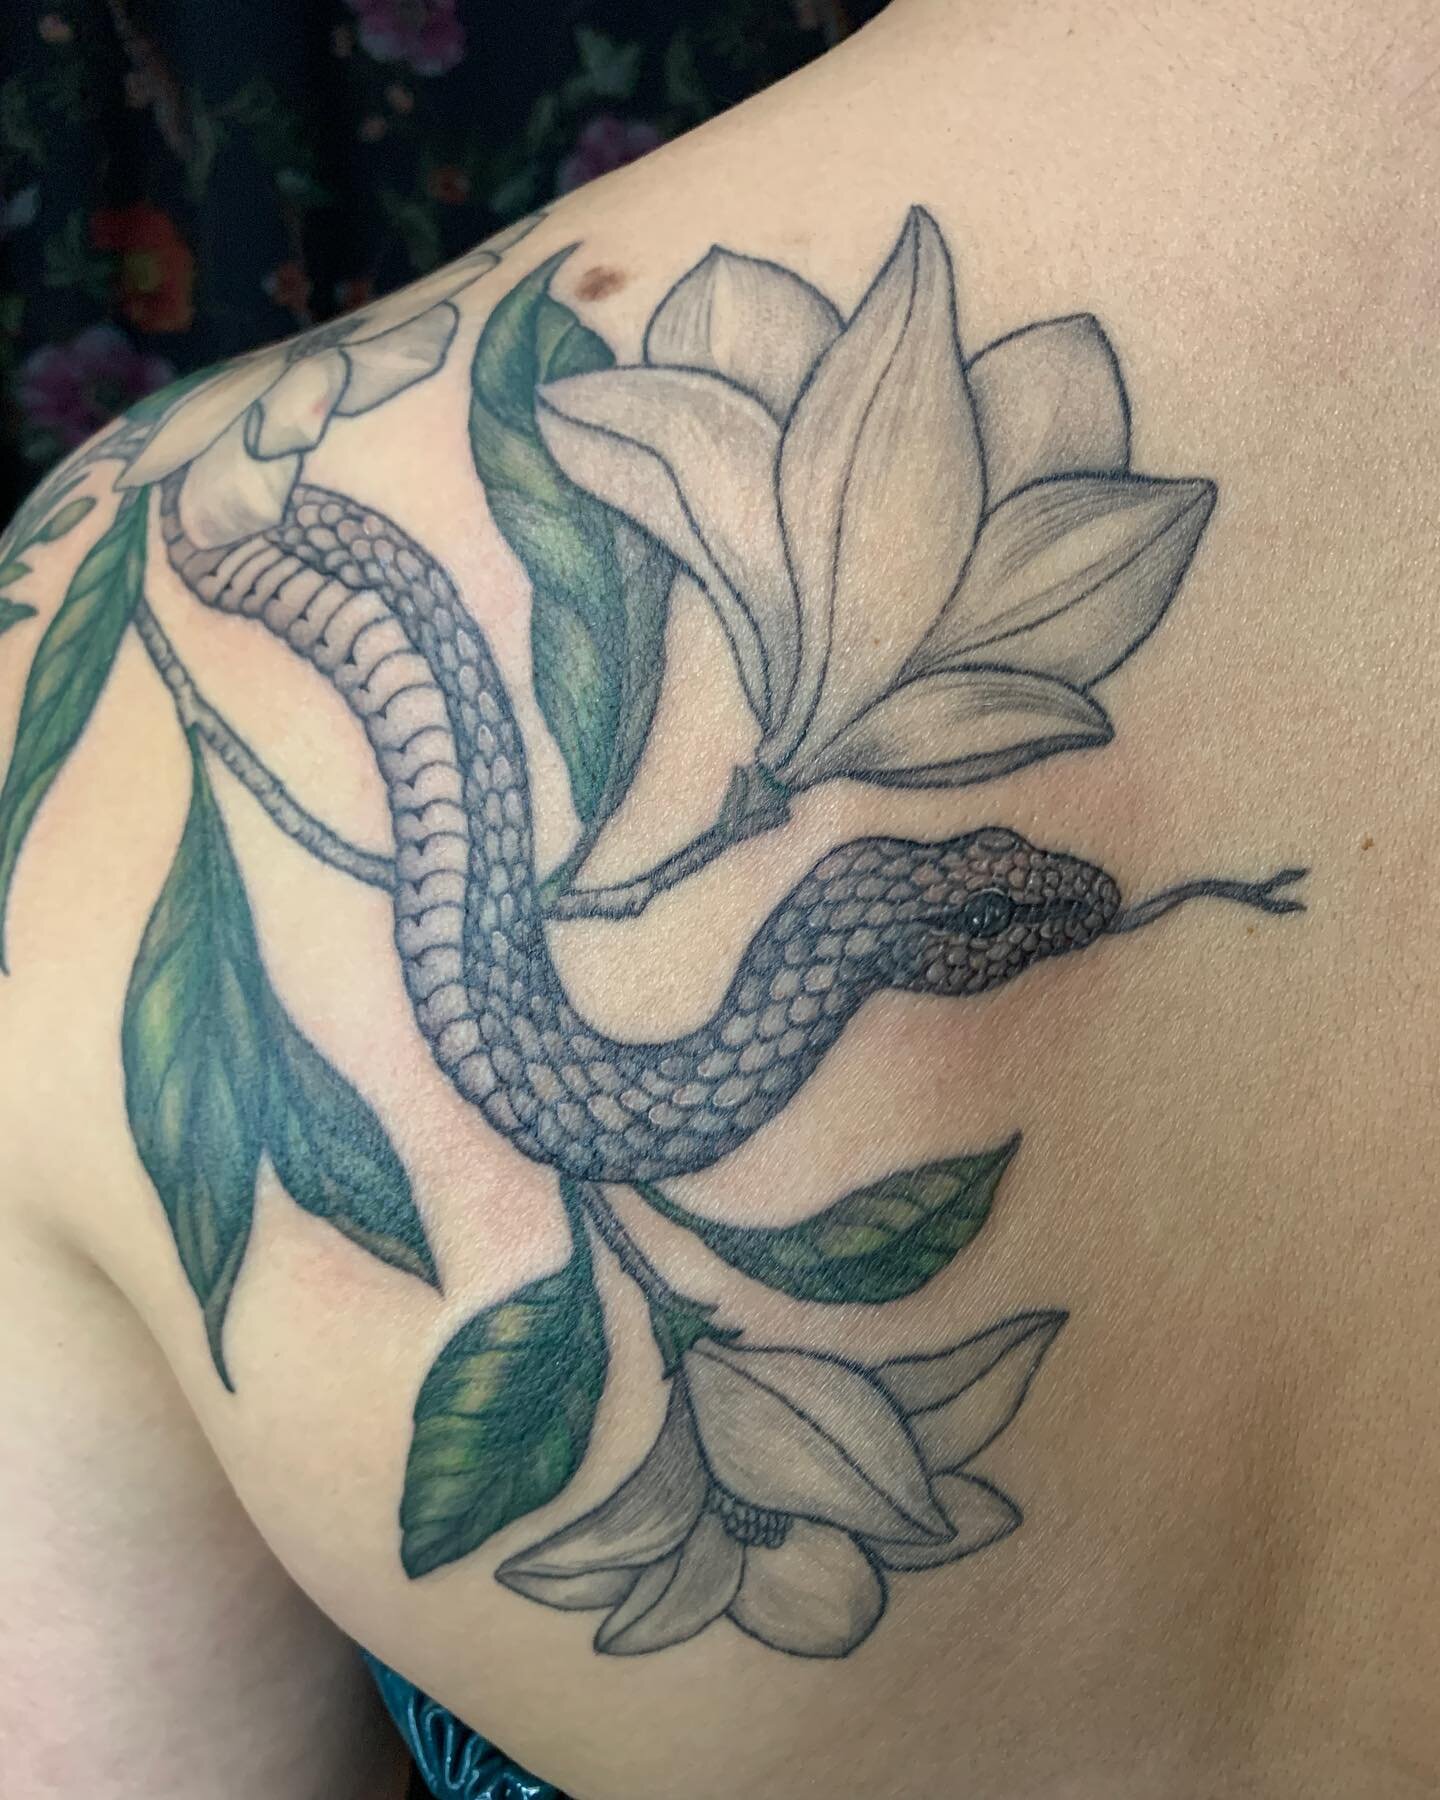 Snake and magnolia woven together 🐍🌺 Thank you Victoria!!! The magnolia towards the front is fresh, the rest of the magnolias are healed!
.
.
.
#snaketattoo #magnoliatattoo #botanicaltattoo #naturetattoo #snake #magnolia